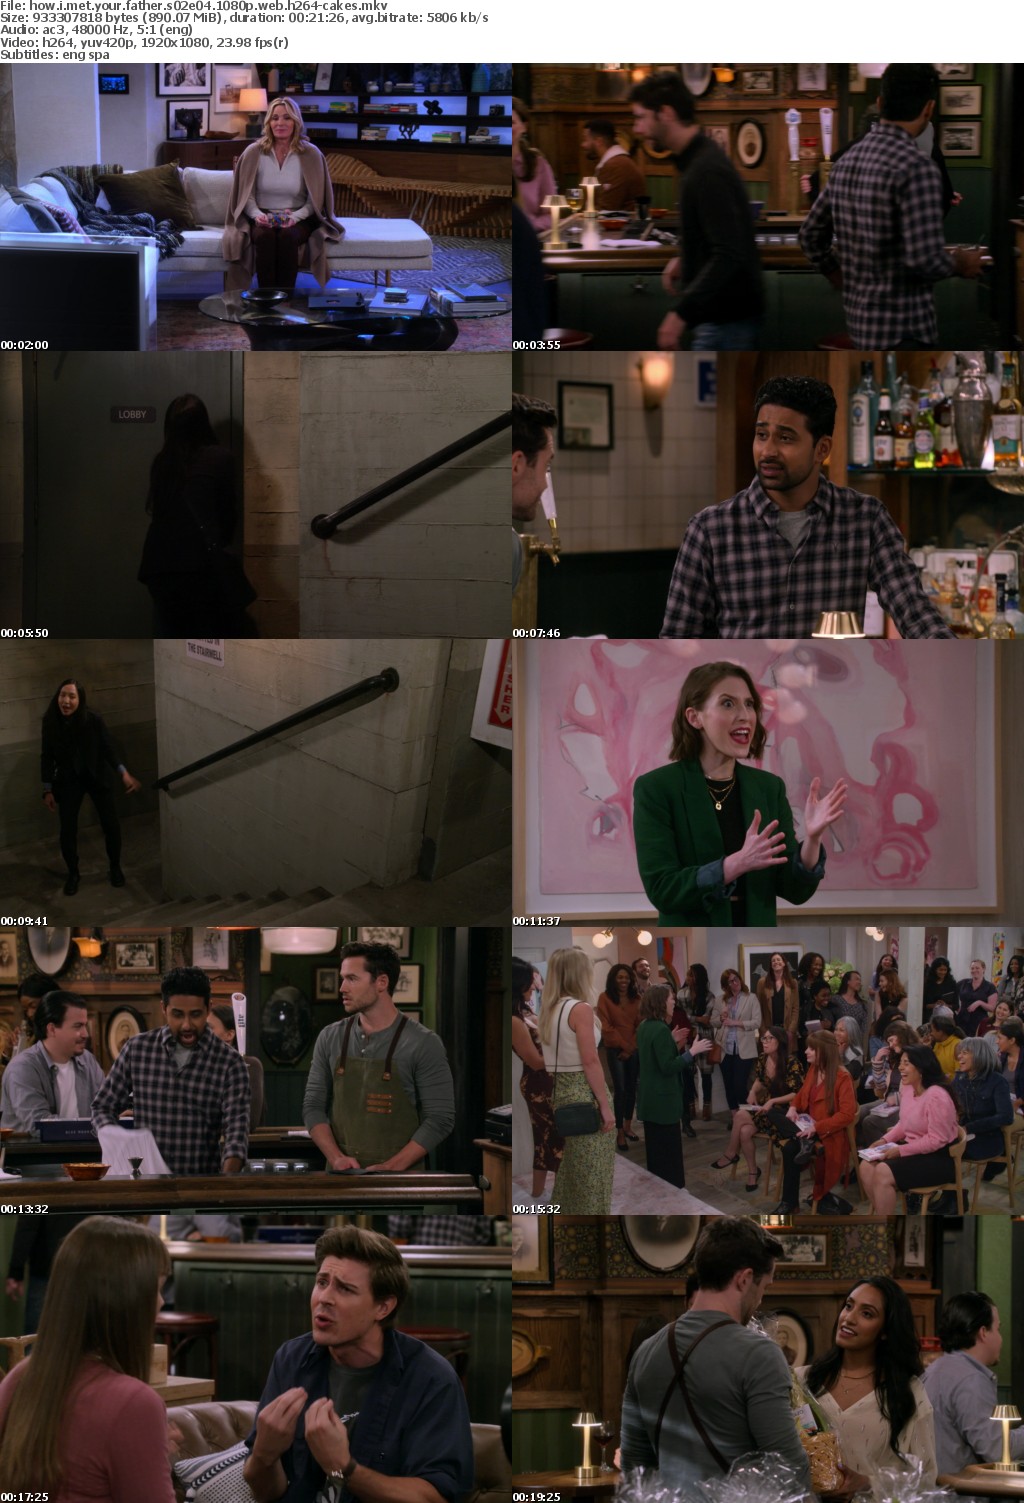 How I Met Your Father S02E04 1080p WEB H264-CAKES